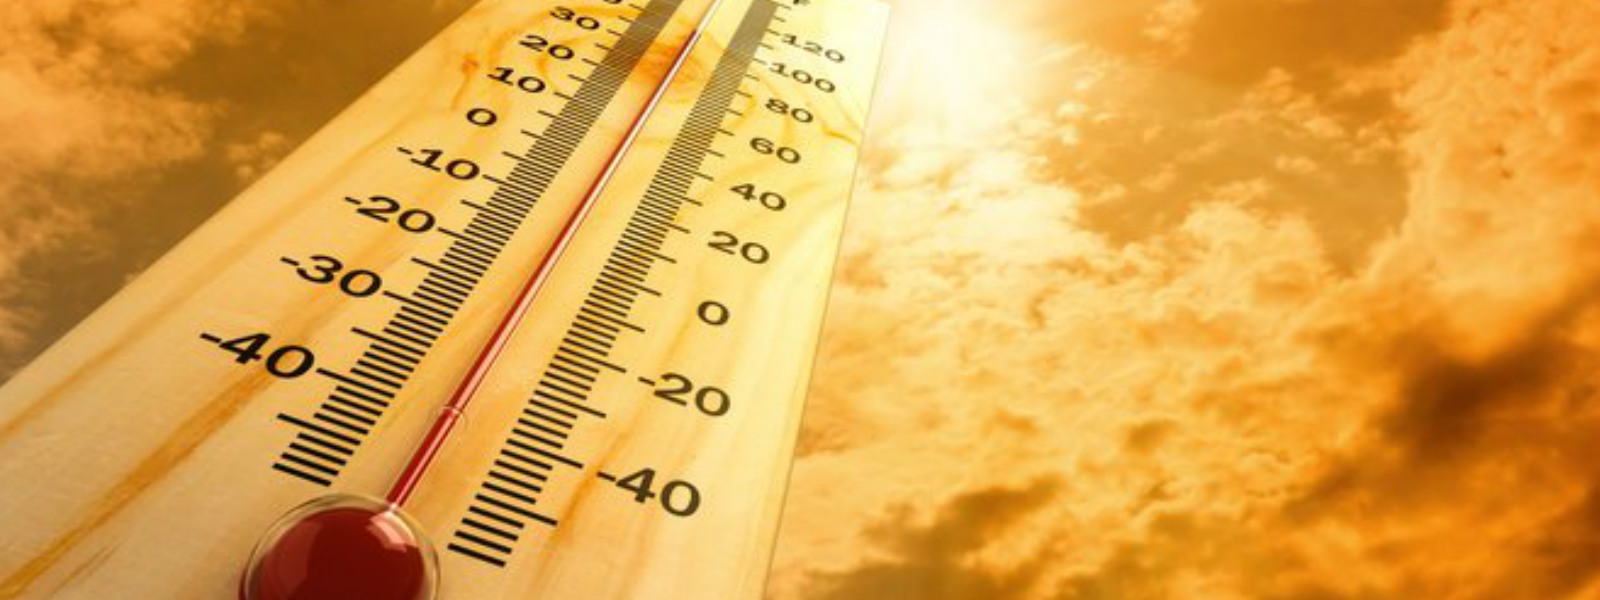 Prevailing warm weather conditions to continue